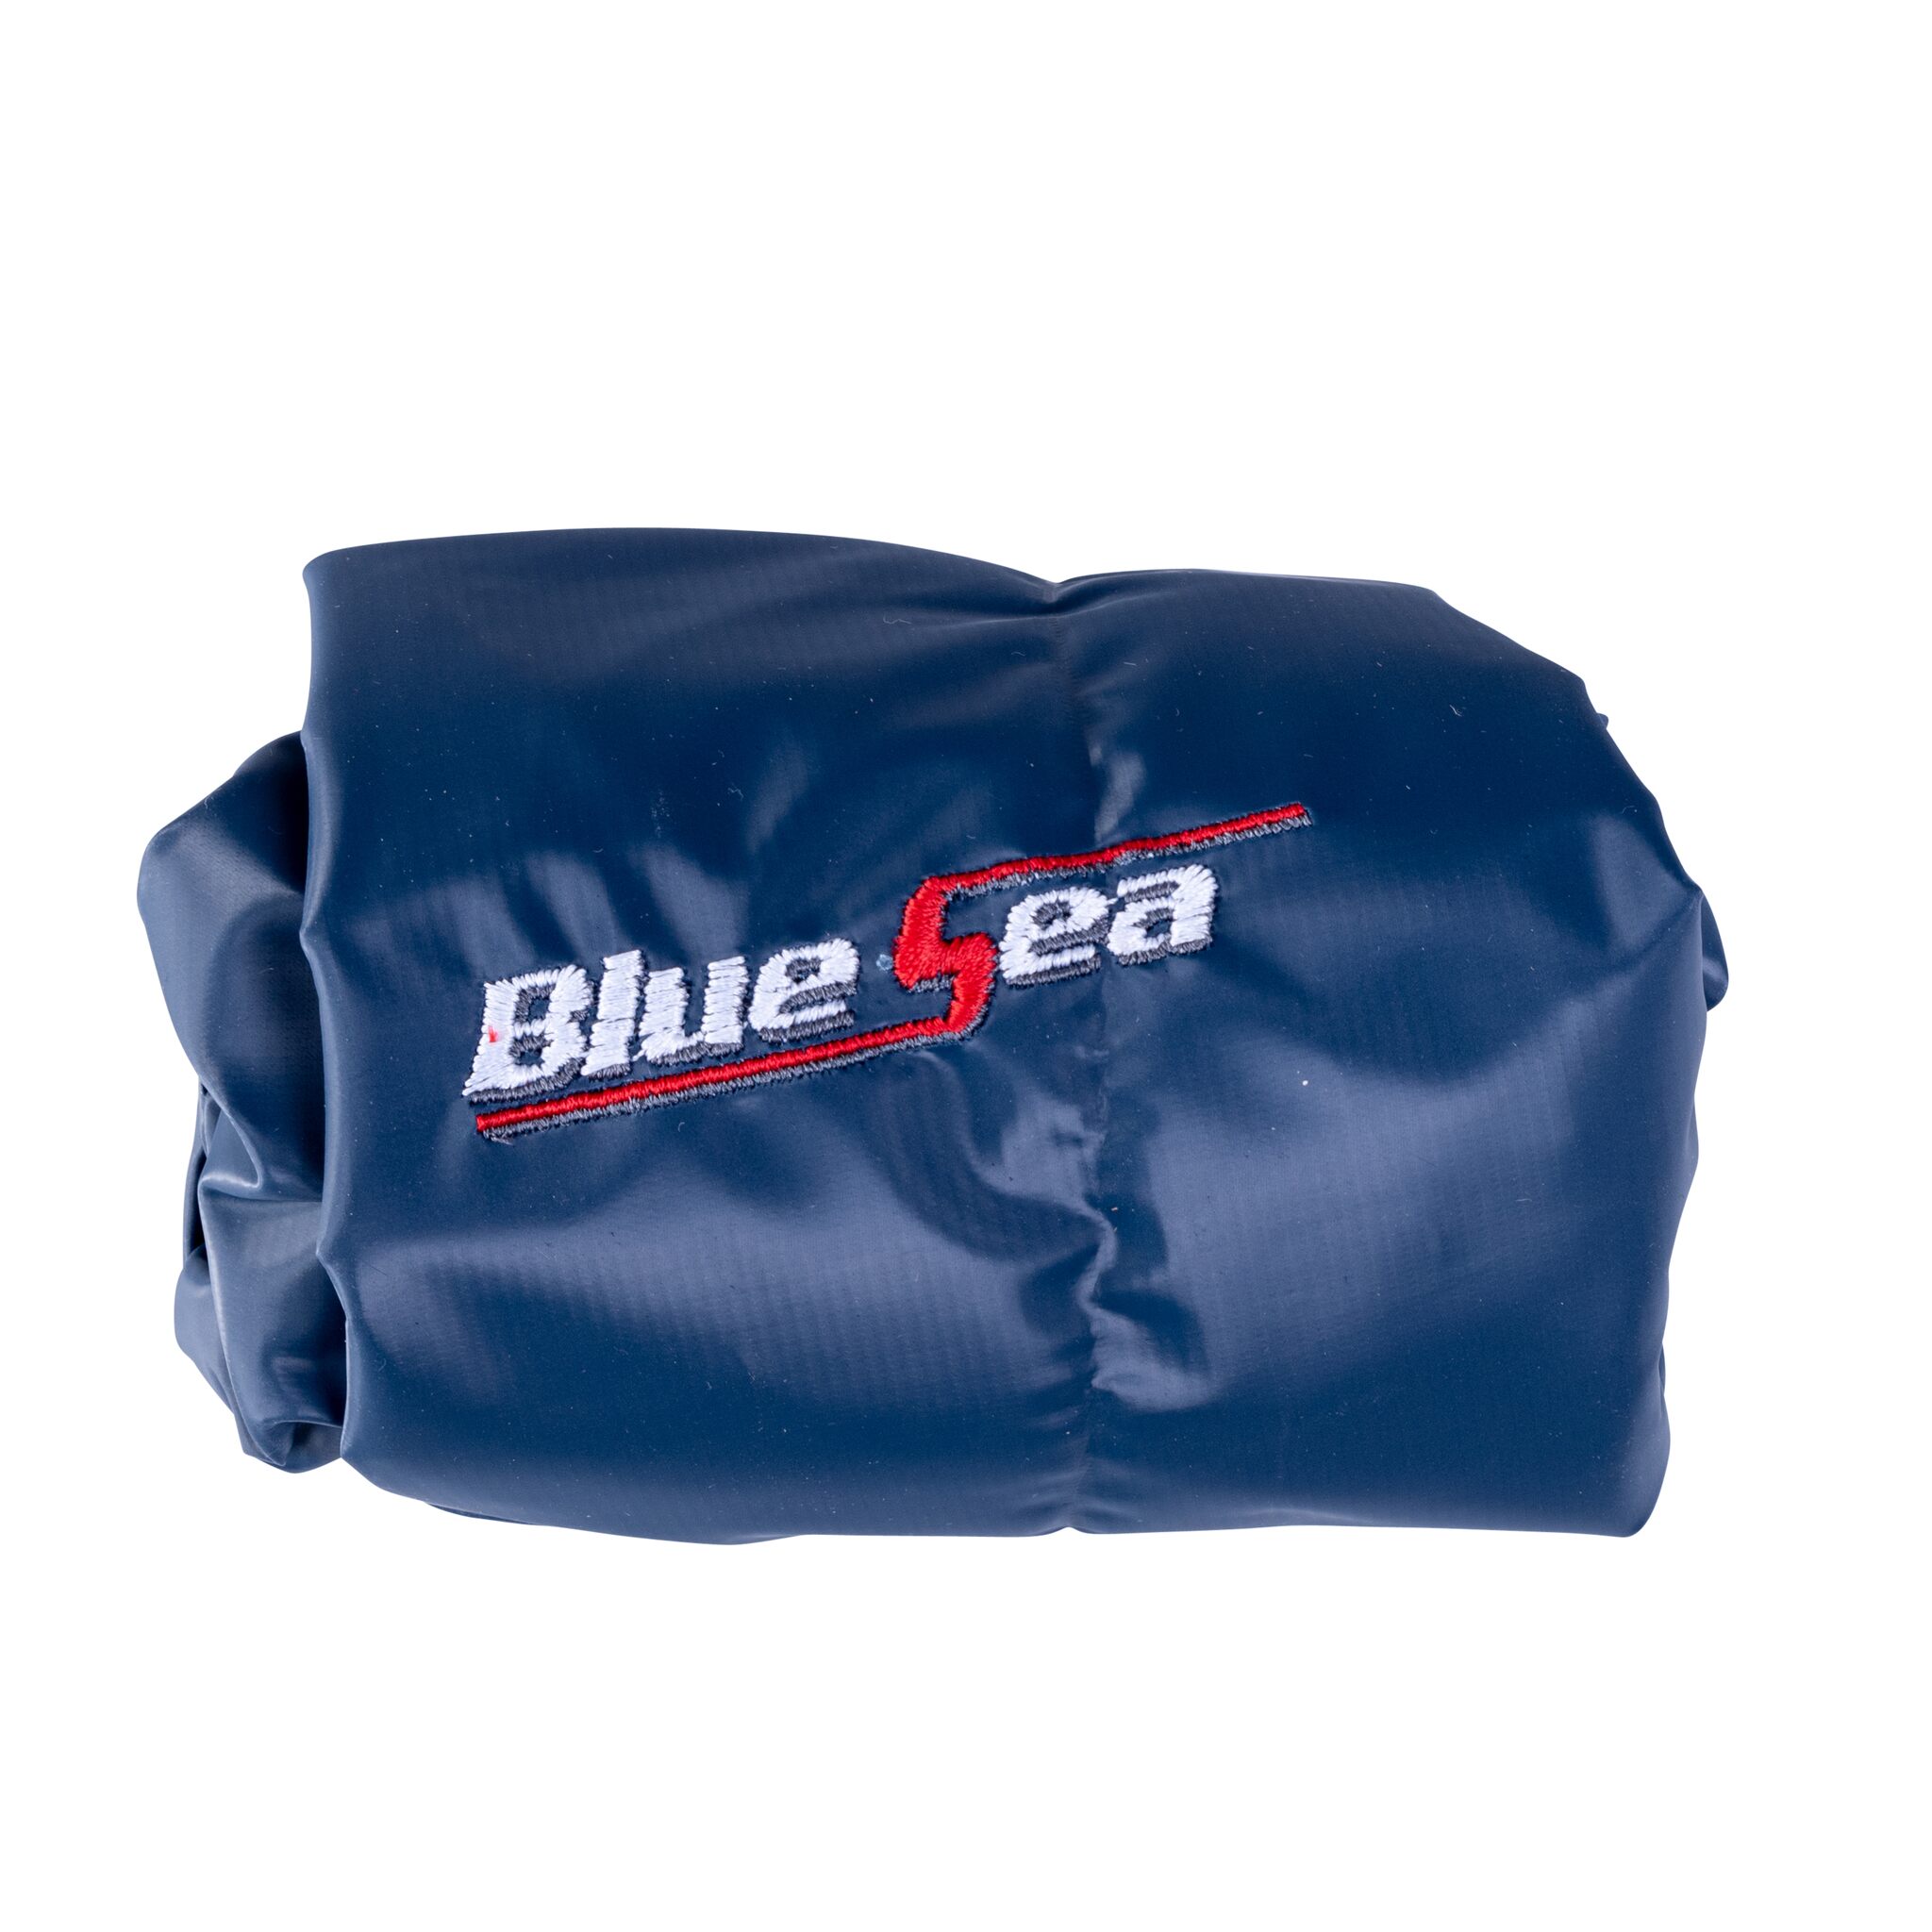 Blue Sea cover for helmsman helm seat